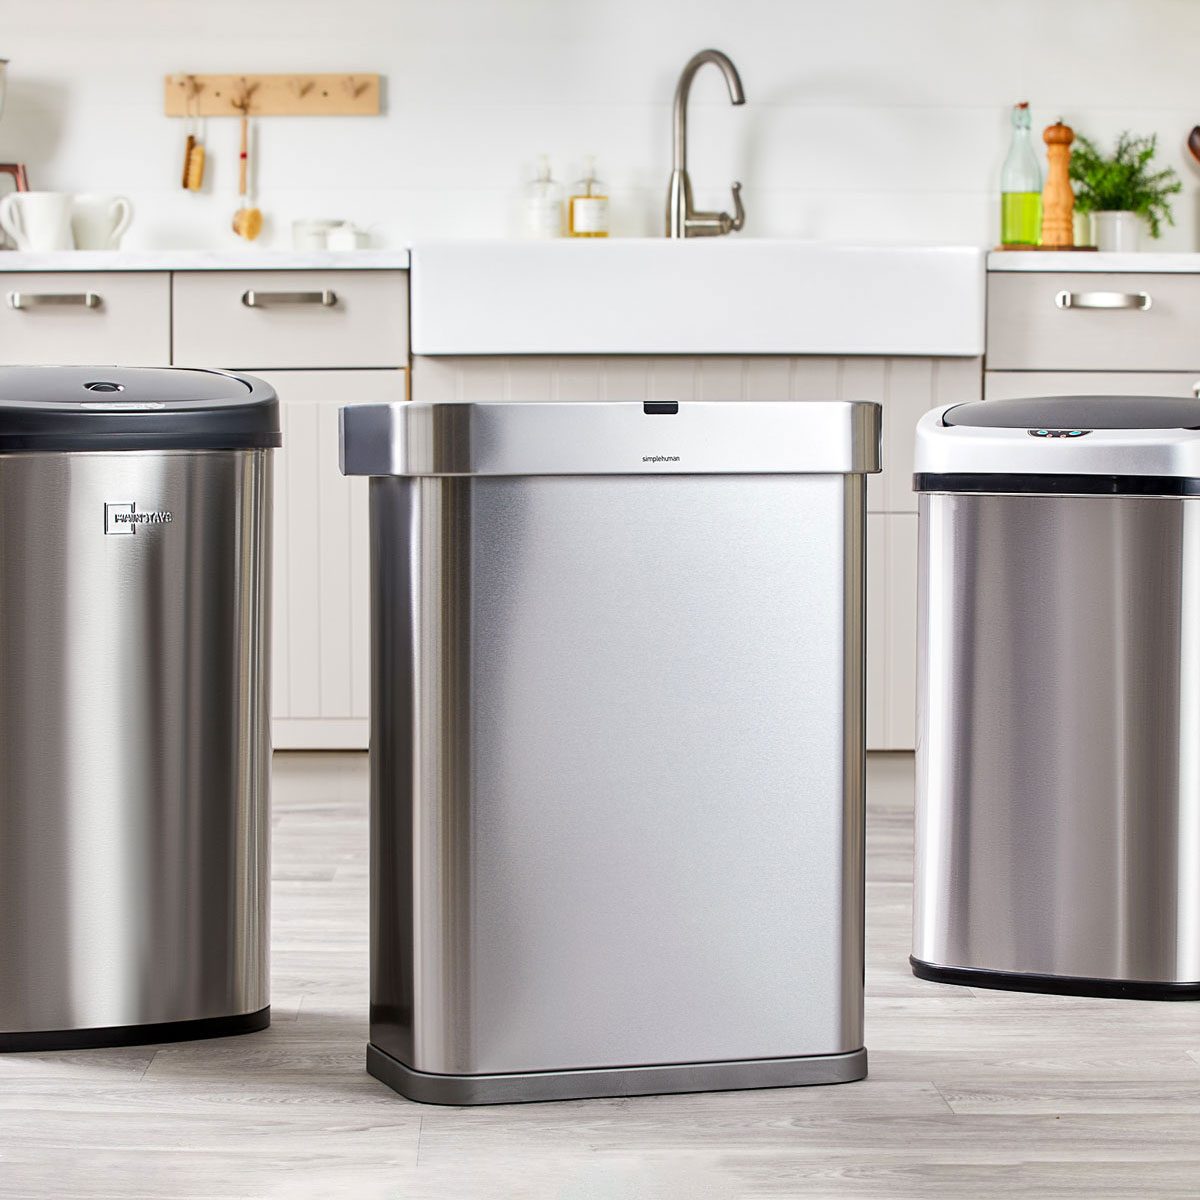 7 Best Touchless Trash Cans For More Sanitary Garbage Disposal